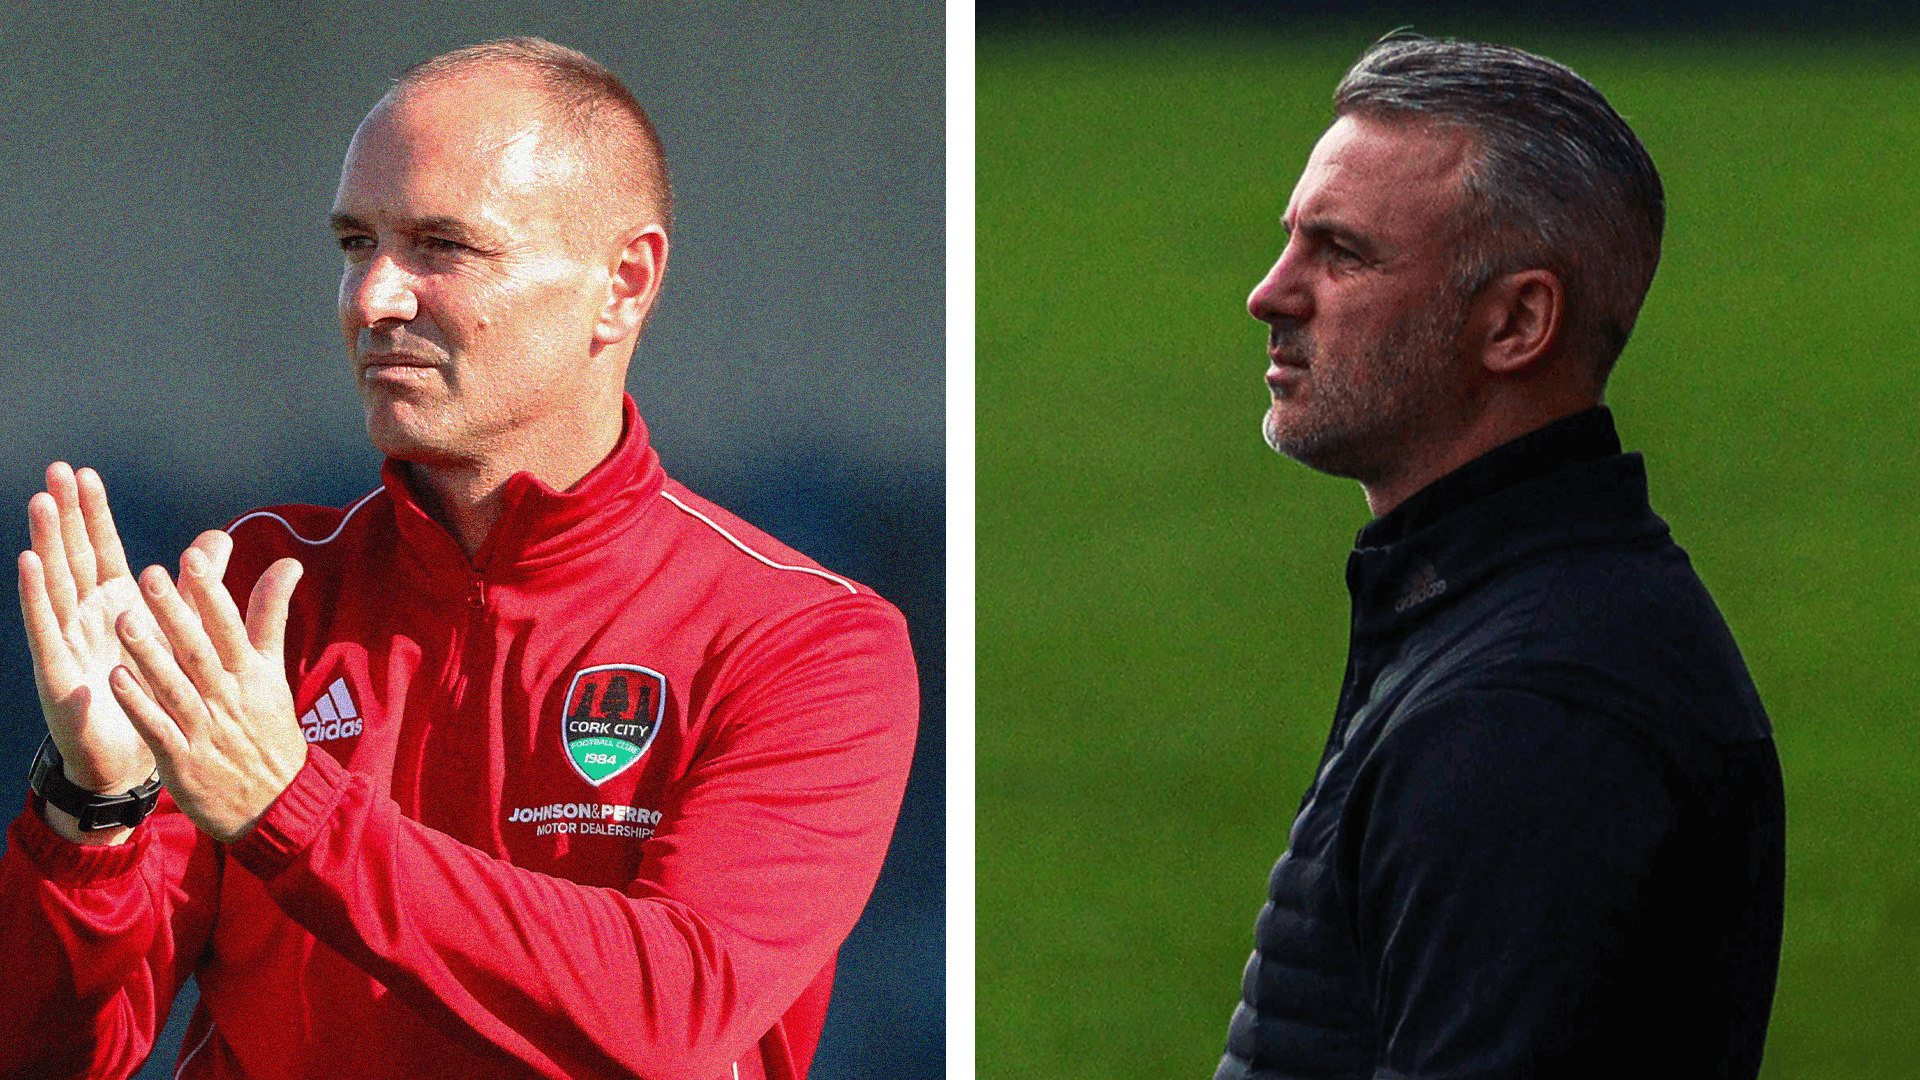 Healy & Murphy confirmed as Managers for 2023